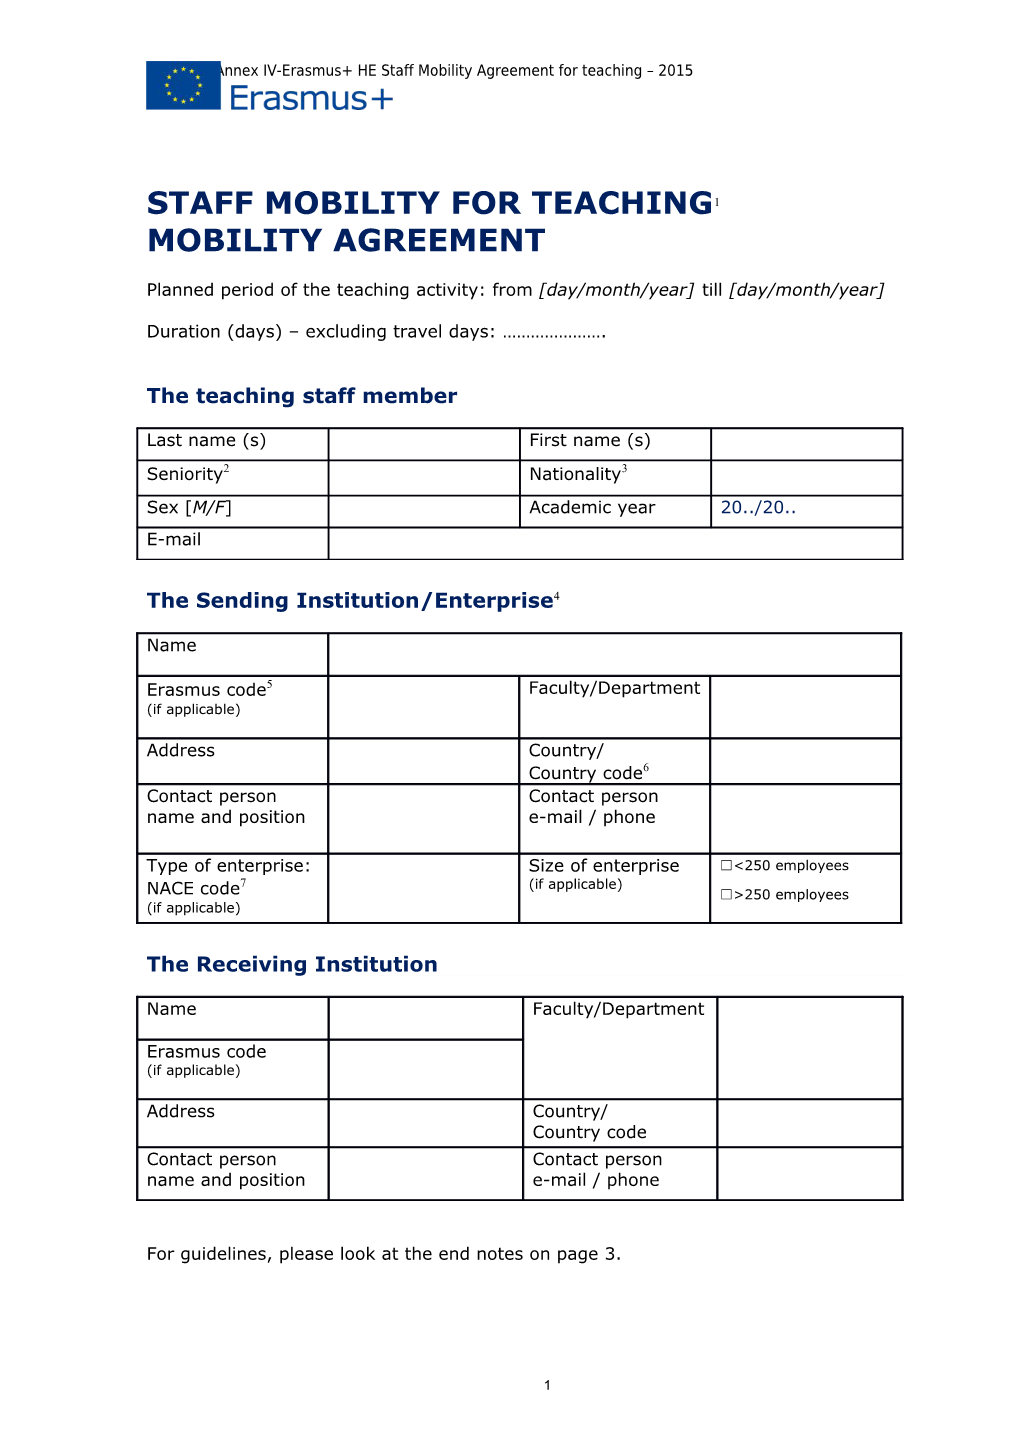 Gfna-II-C-Annex IV-Erasmus+ HE Staff Mobility Agreement for Teaching 2015 s1